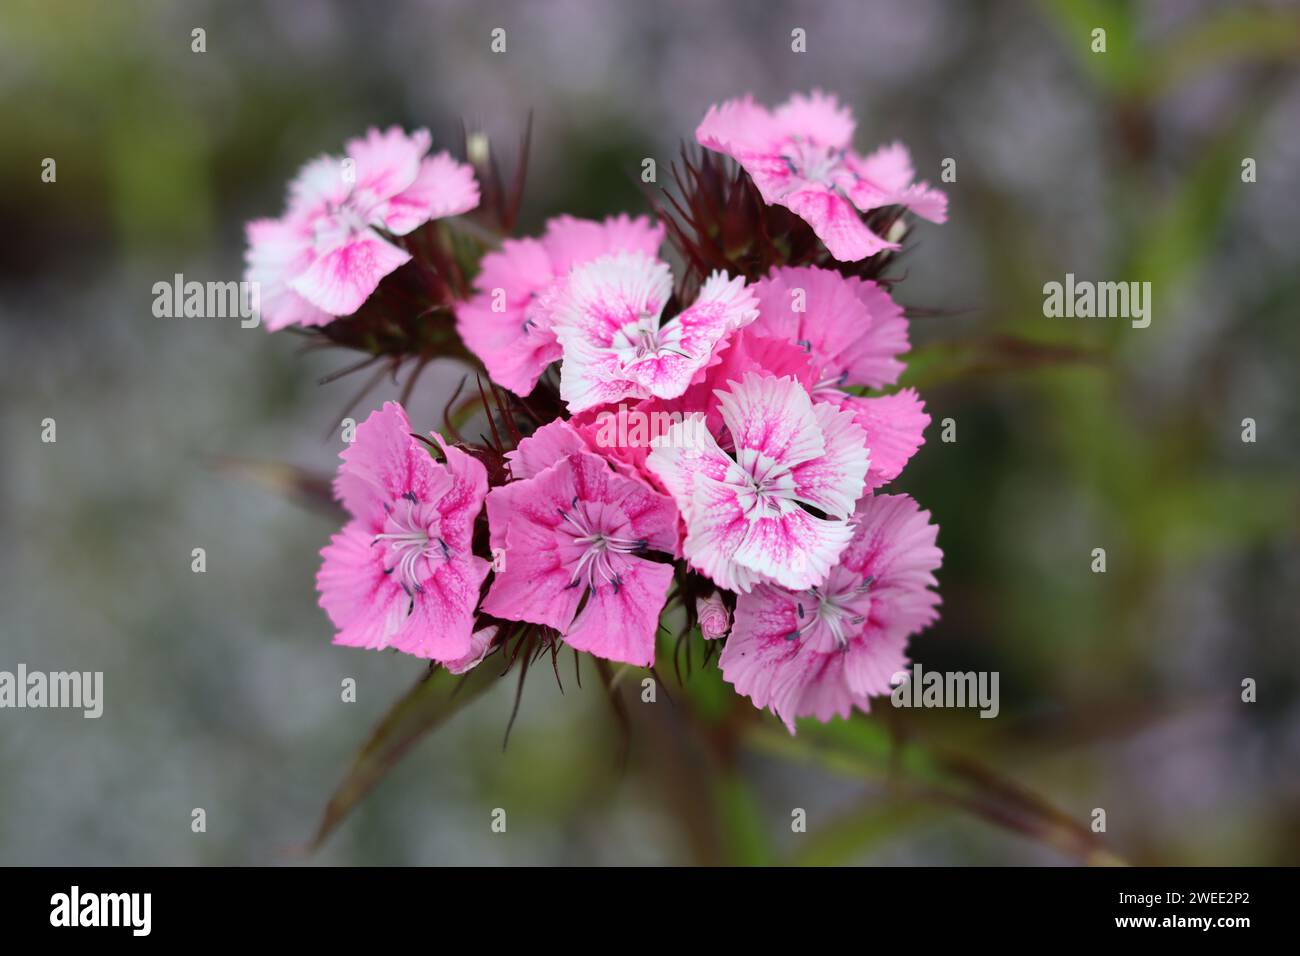 Single pink and white dianthus or sweet william flower Stock Photo